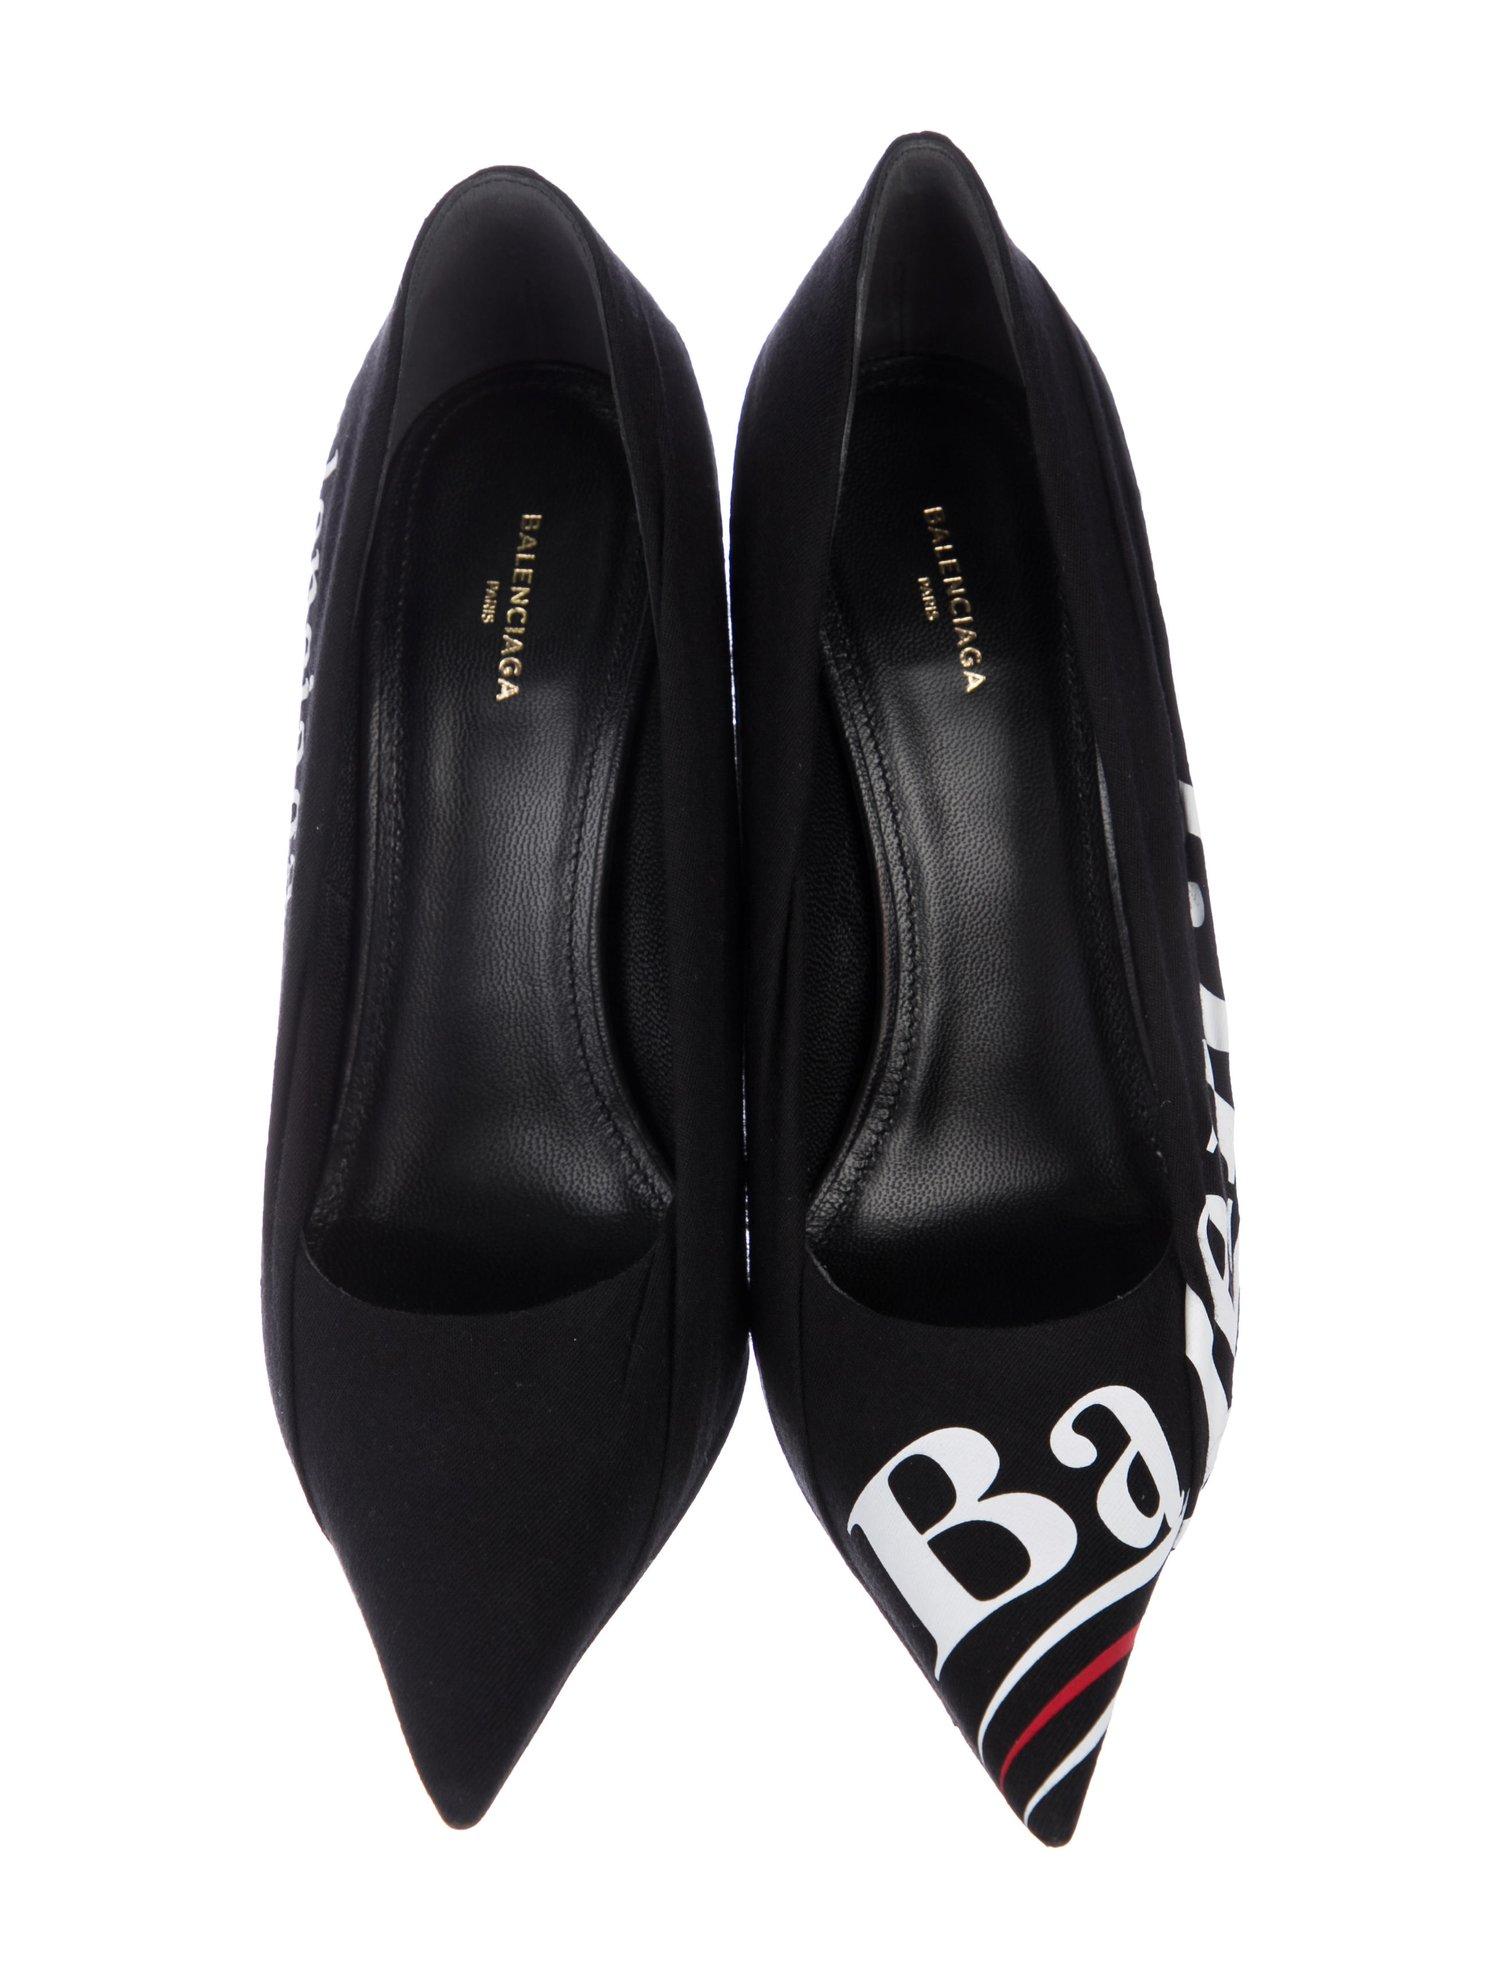 Balenciaga NEW Black Red White Logo Sock Evening Heels Pumps in Box

Size IT 36.5
Nylon/Fabric
Leather
Slip on 
Made in Italy
Heel height 4.5